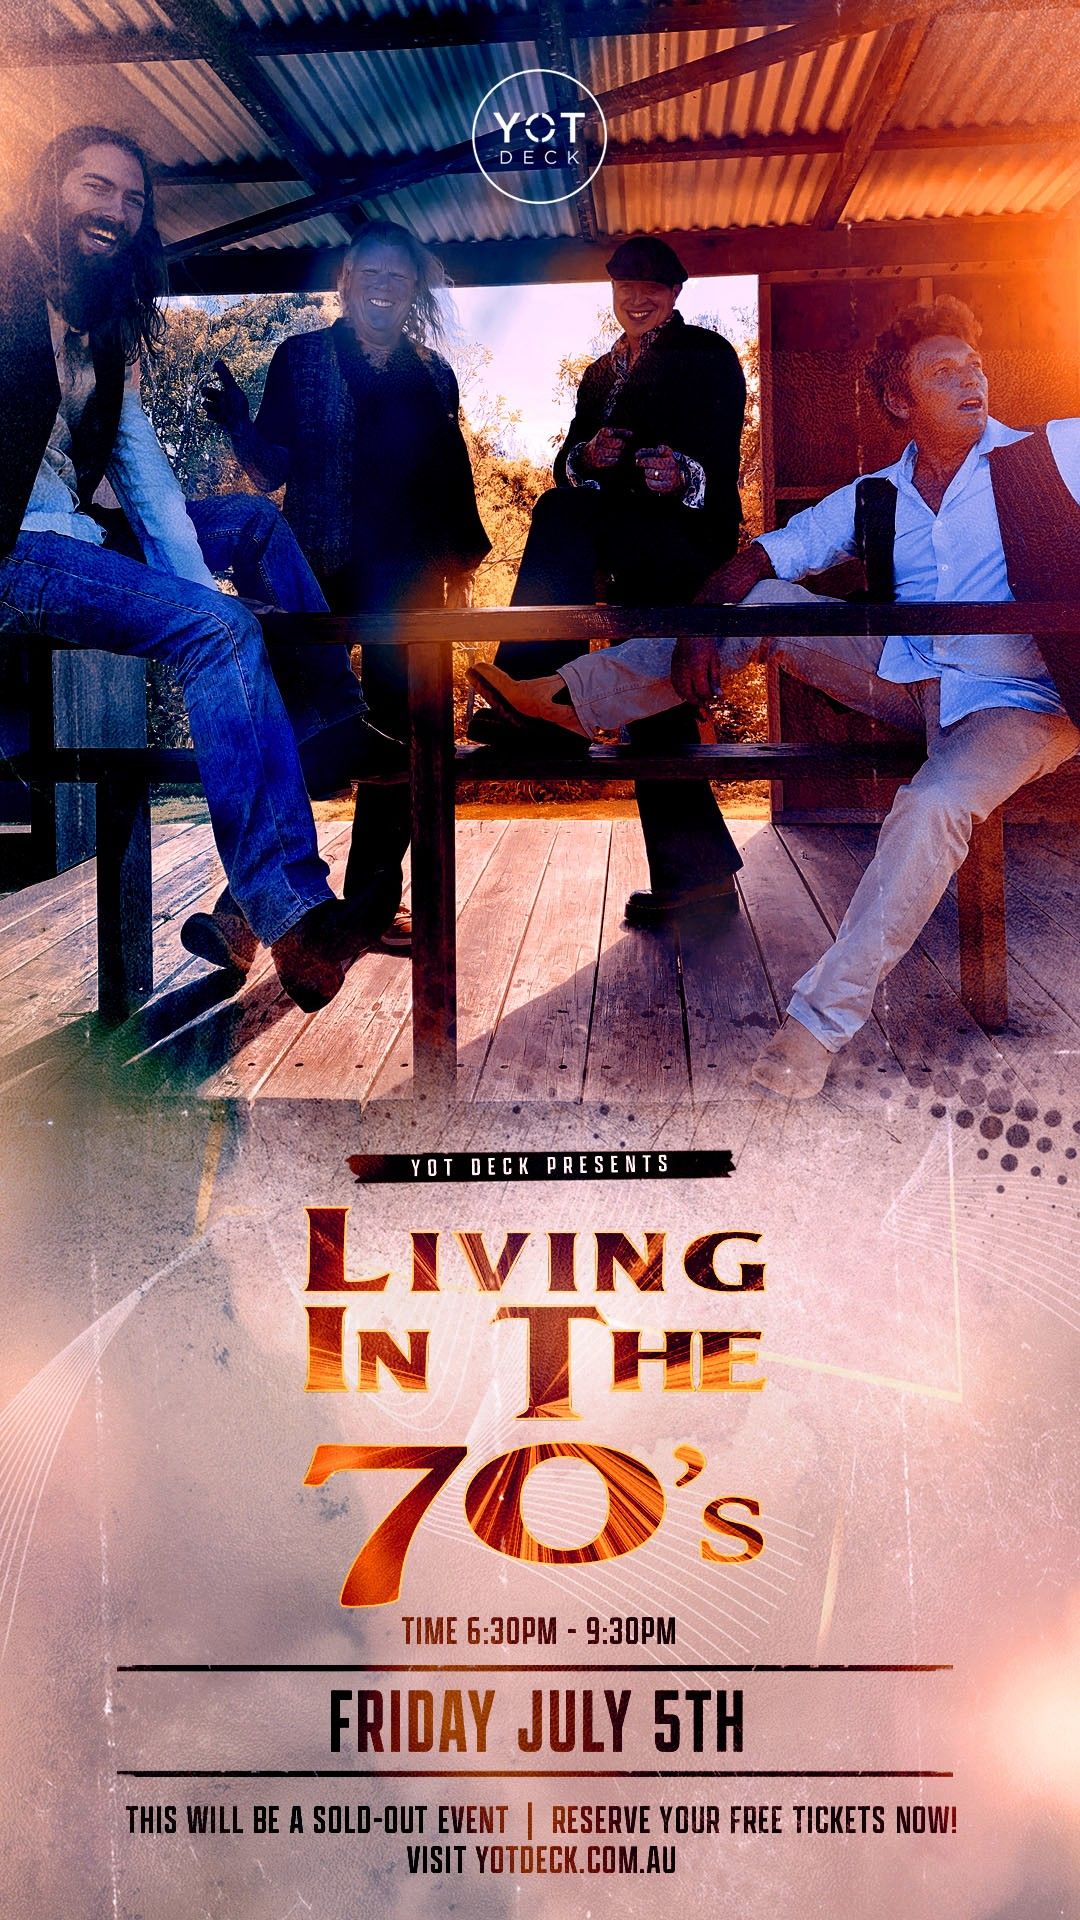 LIVING IN THE 70'S | LIVE AT YOT DECK